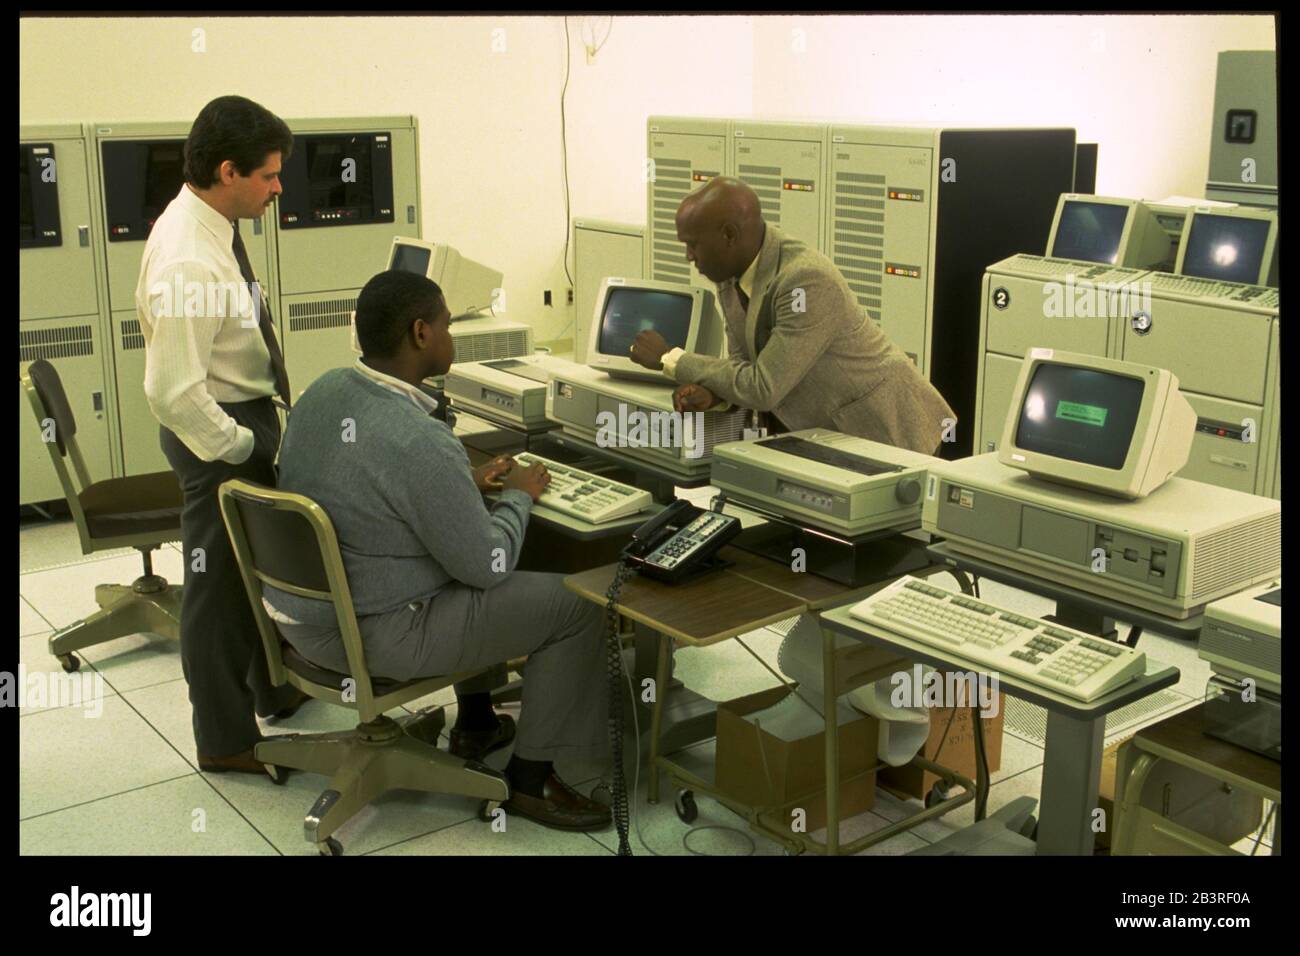 Austin Texas USA,1990: Supervisor watches data entry specialist work on computer terminal with mainframe computers in the background at a processing c Stock Photo